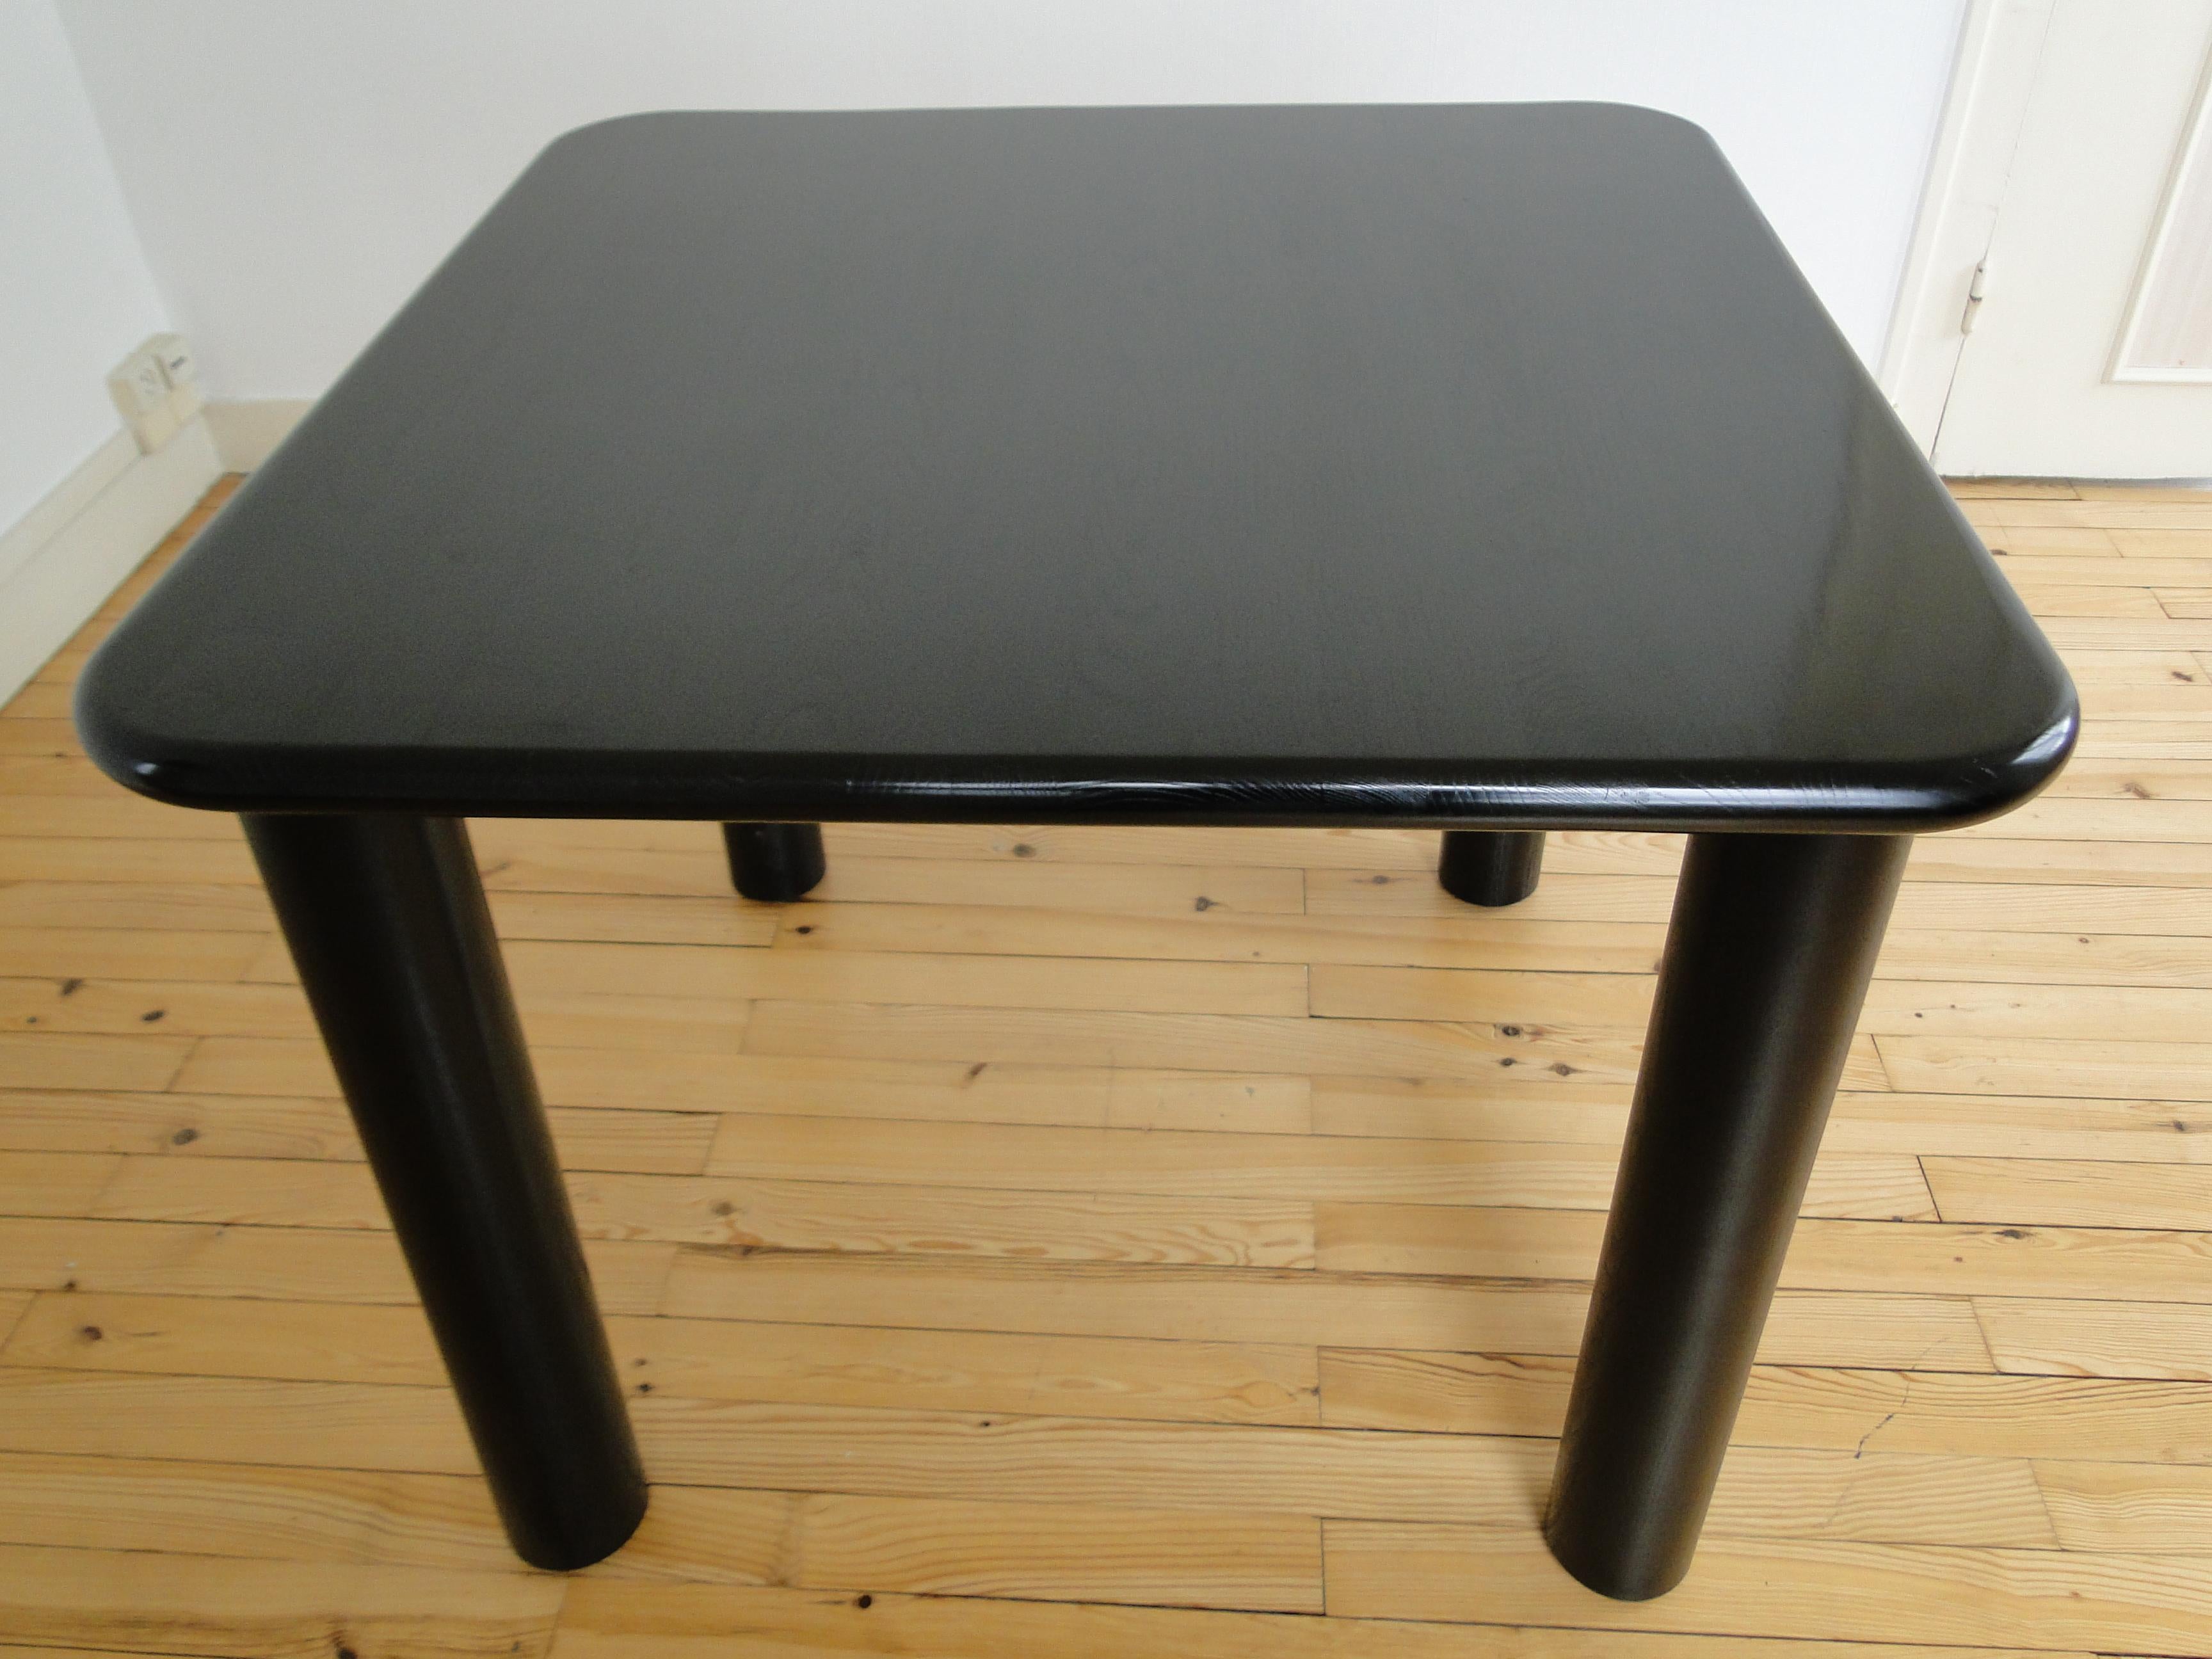 Augusto Savini for Pozzi, dining table 72 x 89 x 89 cm., lacquered wood, Italy, 1965.


Very nice square table in black lacquered wood and 4 round legs in very good condition.

Augusto Savini (Argentinian, born 1930).

